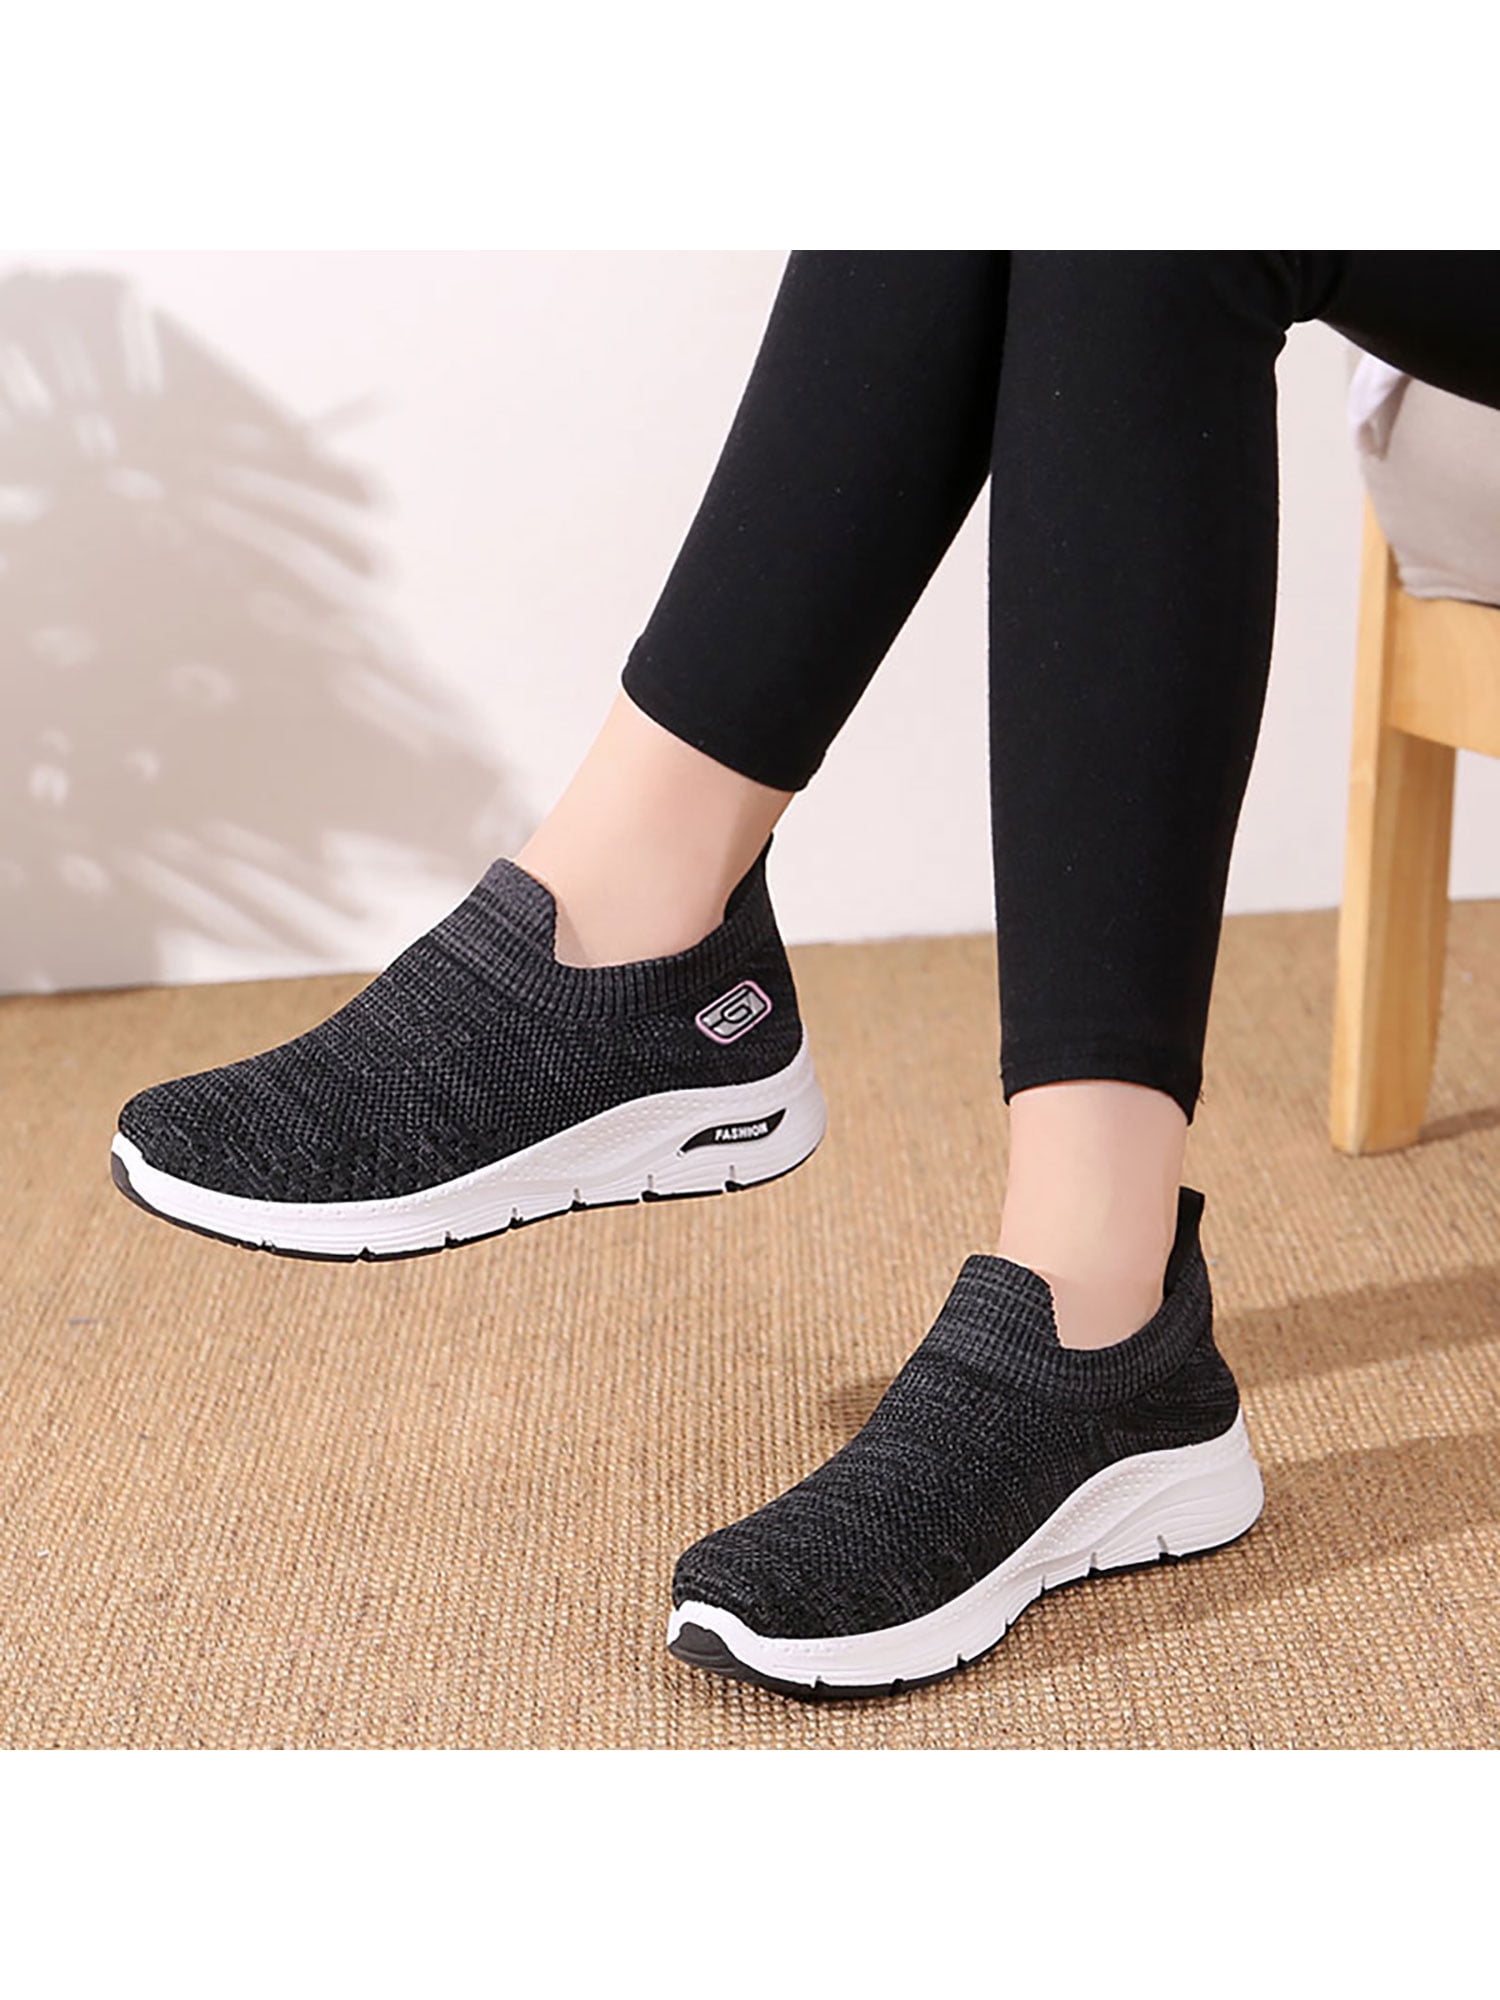 Women's Sock Shoes Sneakers Running Shoes Casual Boots Breathable Sports Fashion